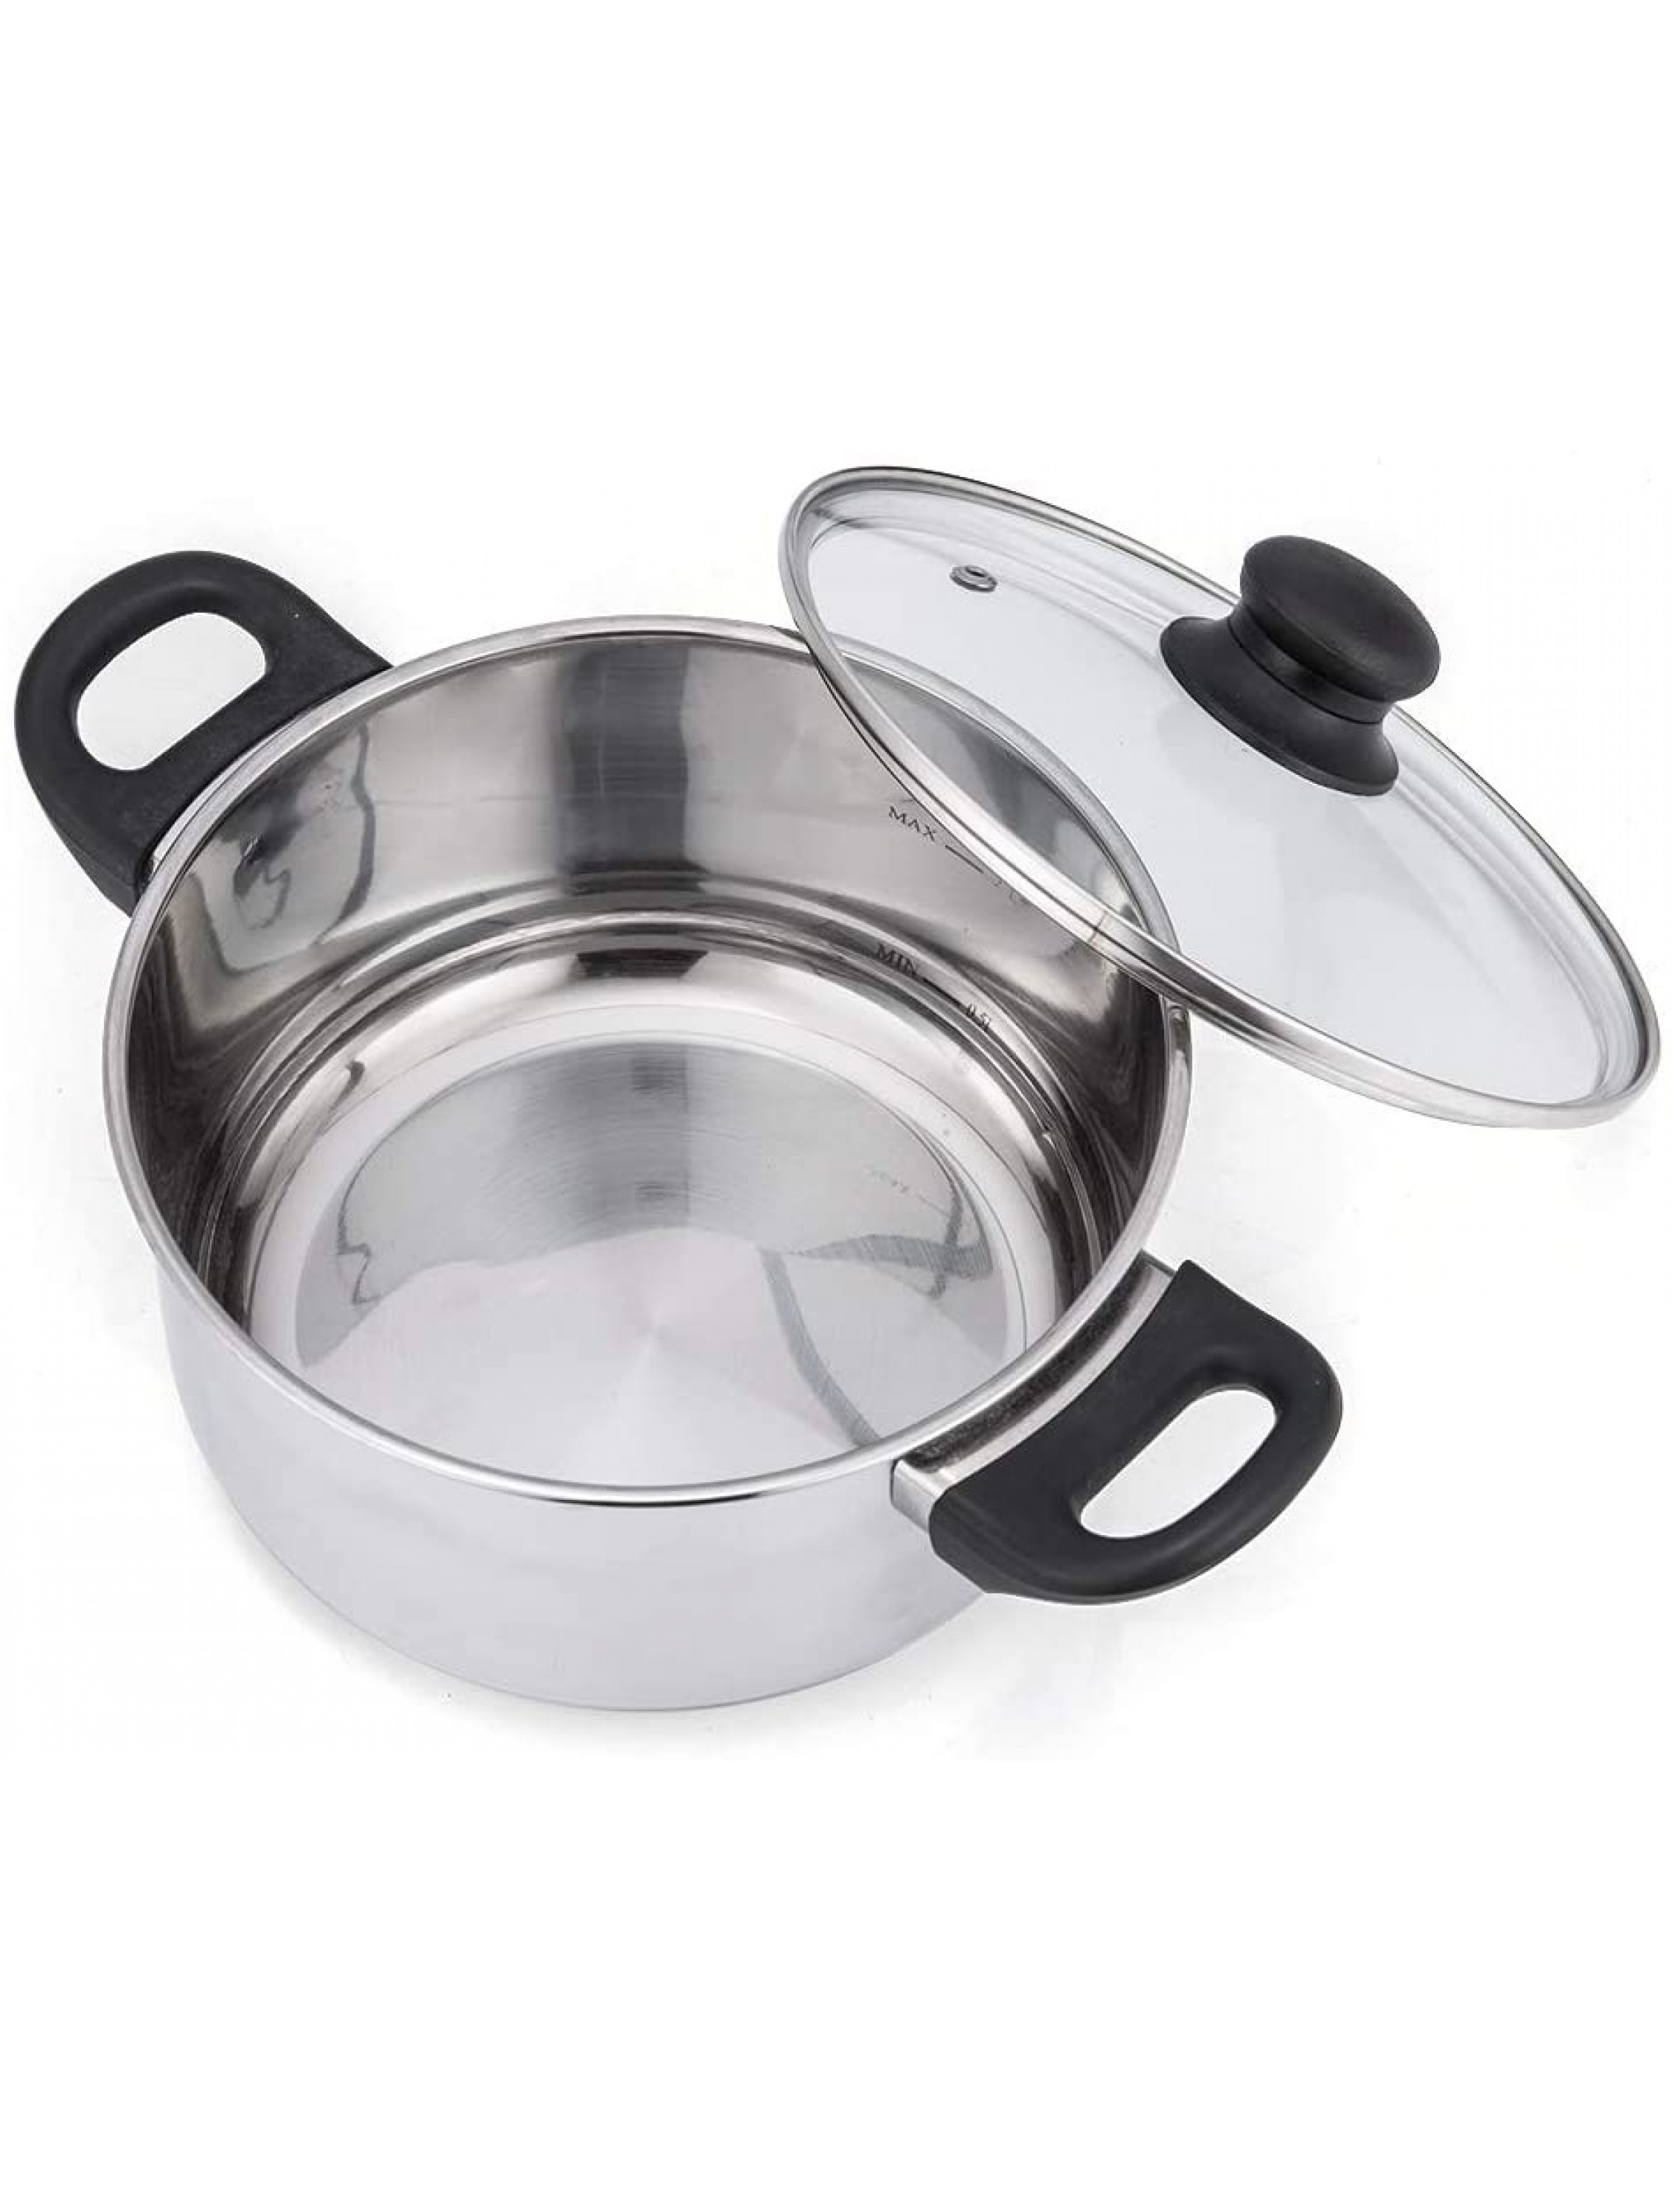 NARCE Stainless Steel Stockpot 3 Quart Stock Pot with Lid Heat-Proof Double Handles Dishwasher Safe - BG6IWI31M